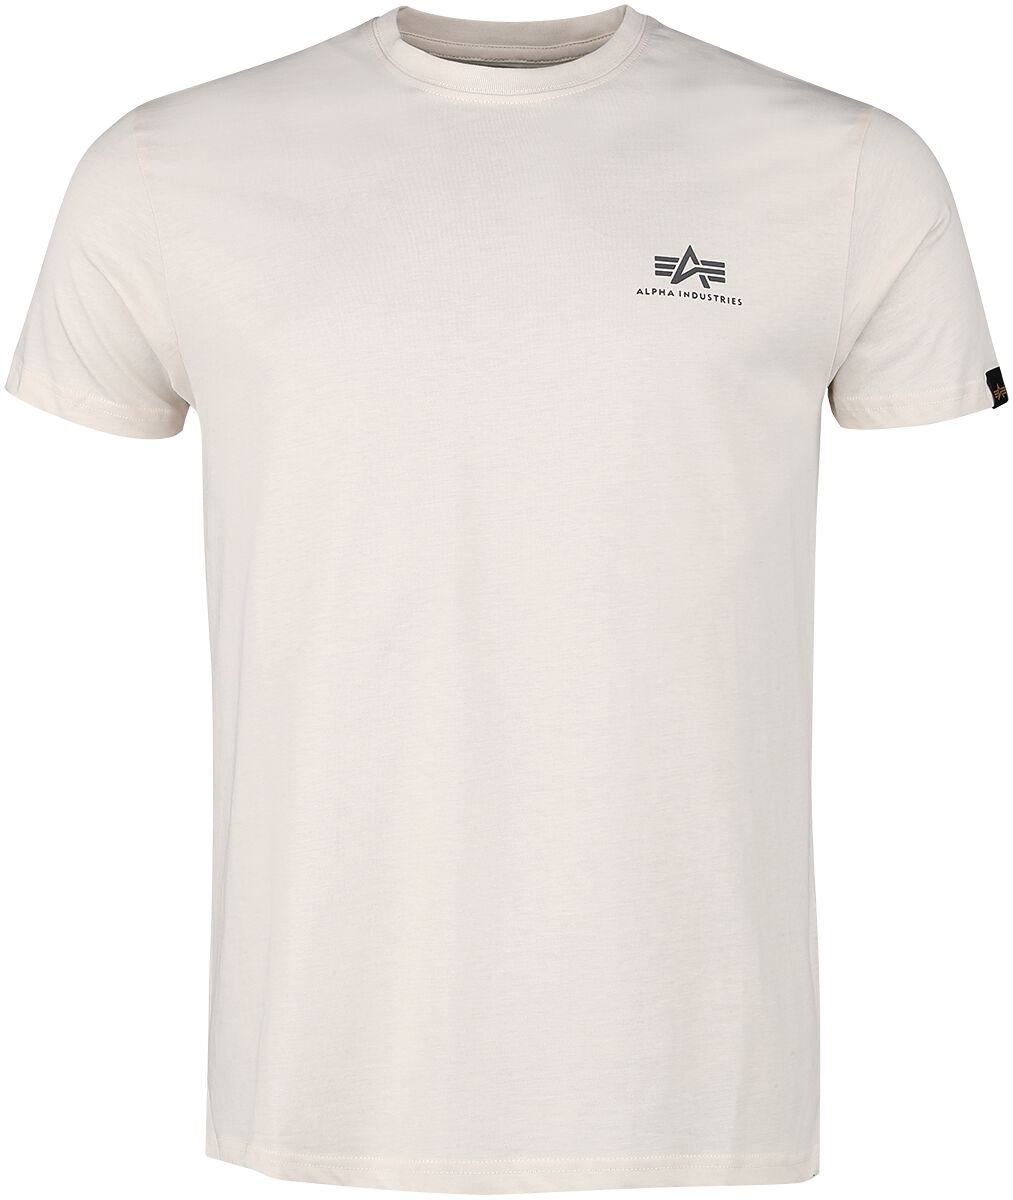 Alpha Industries Backprint T T-Shirt creme in L